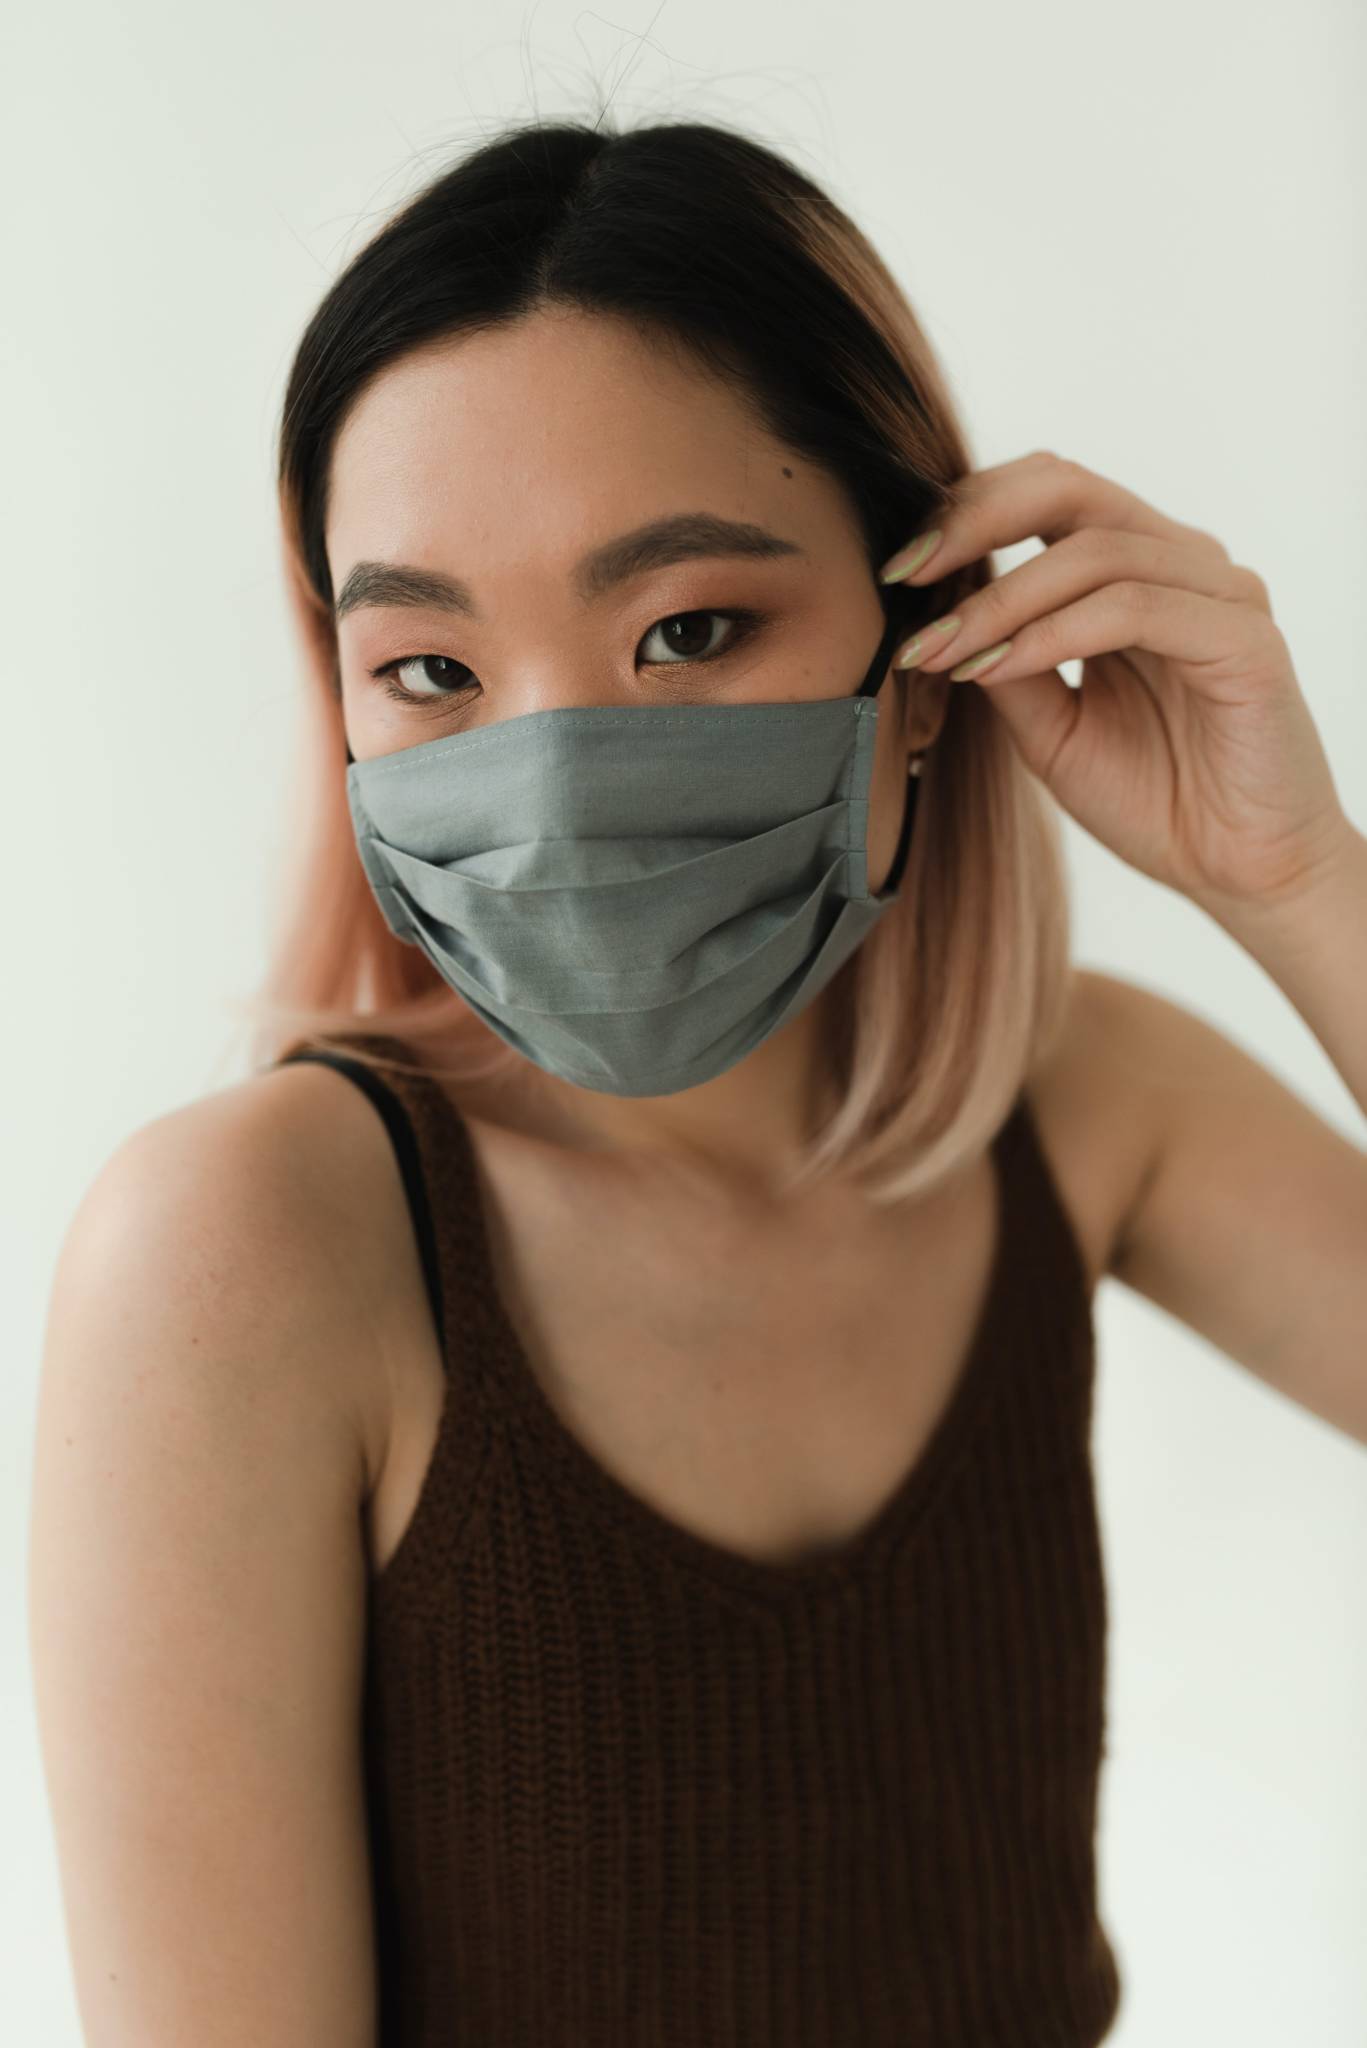 asian woman in maroon tank top wearing mask and touching side of face